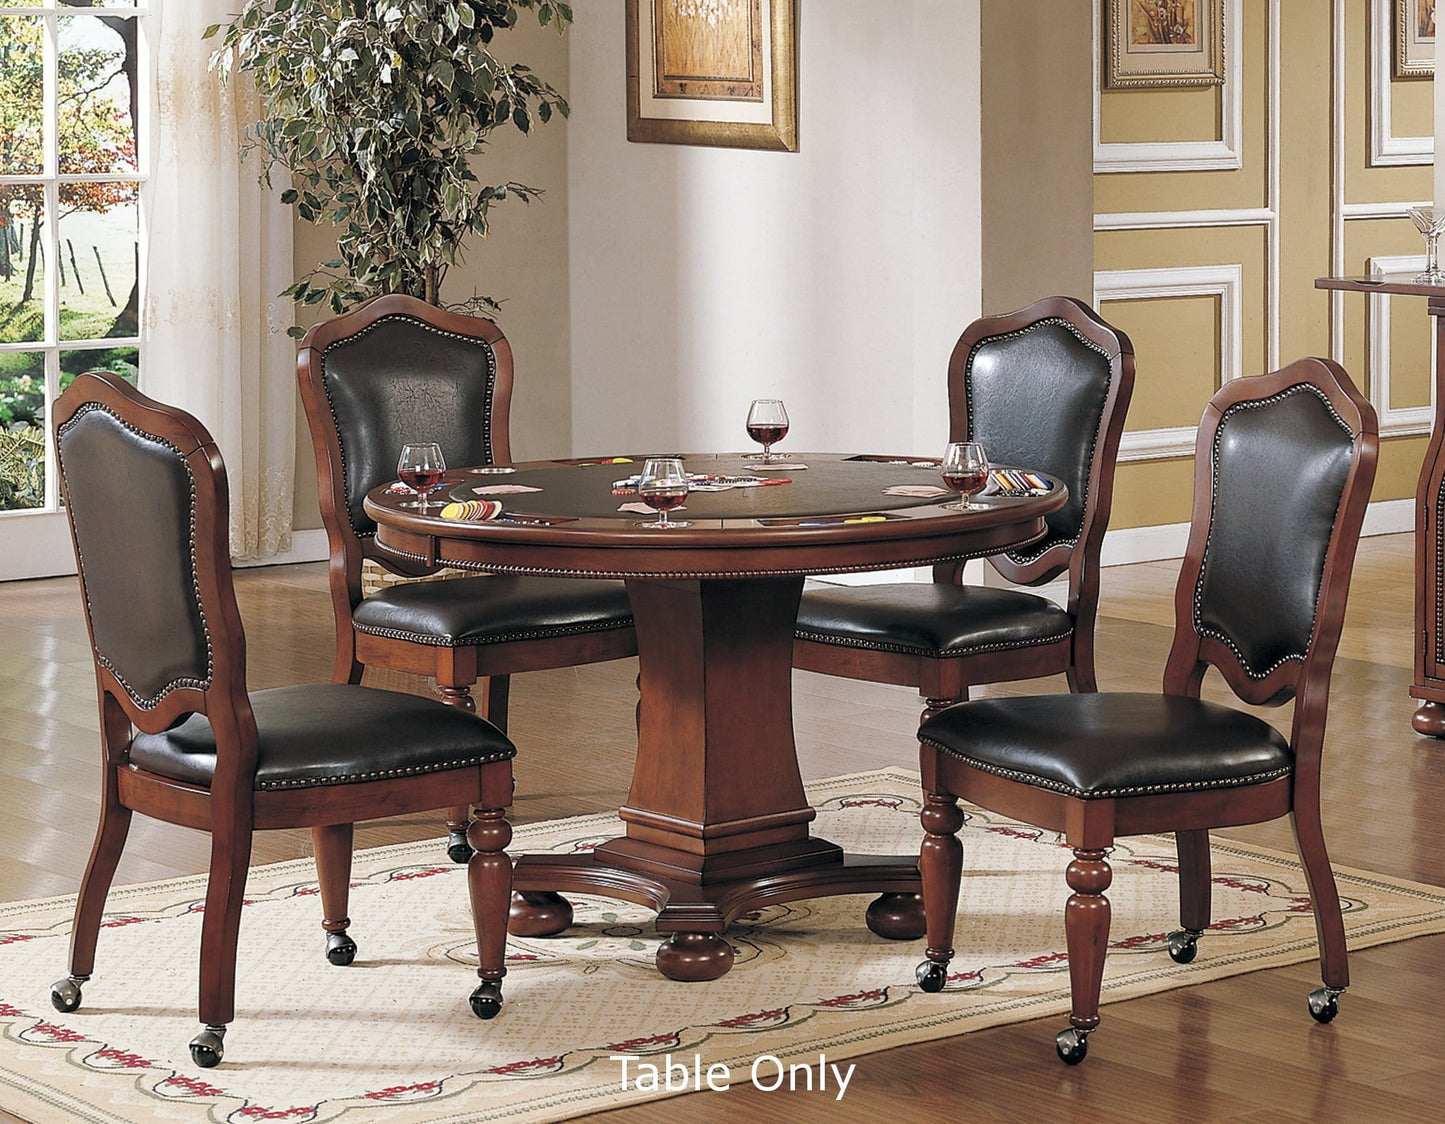 This 5 piece dining & poker table set is also available 